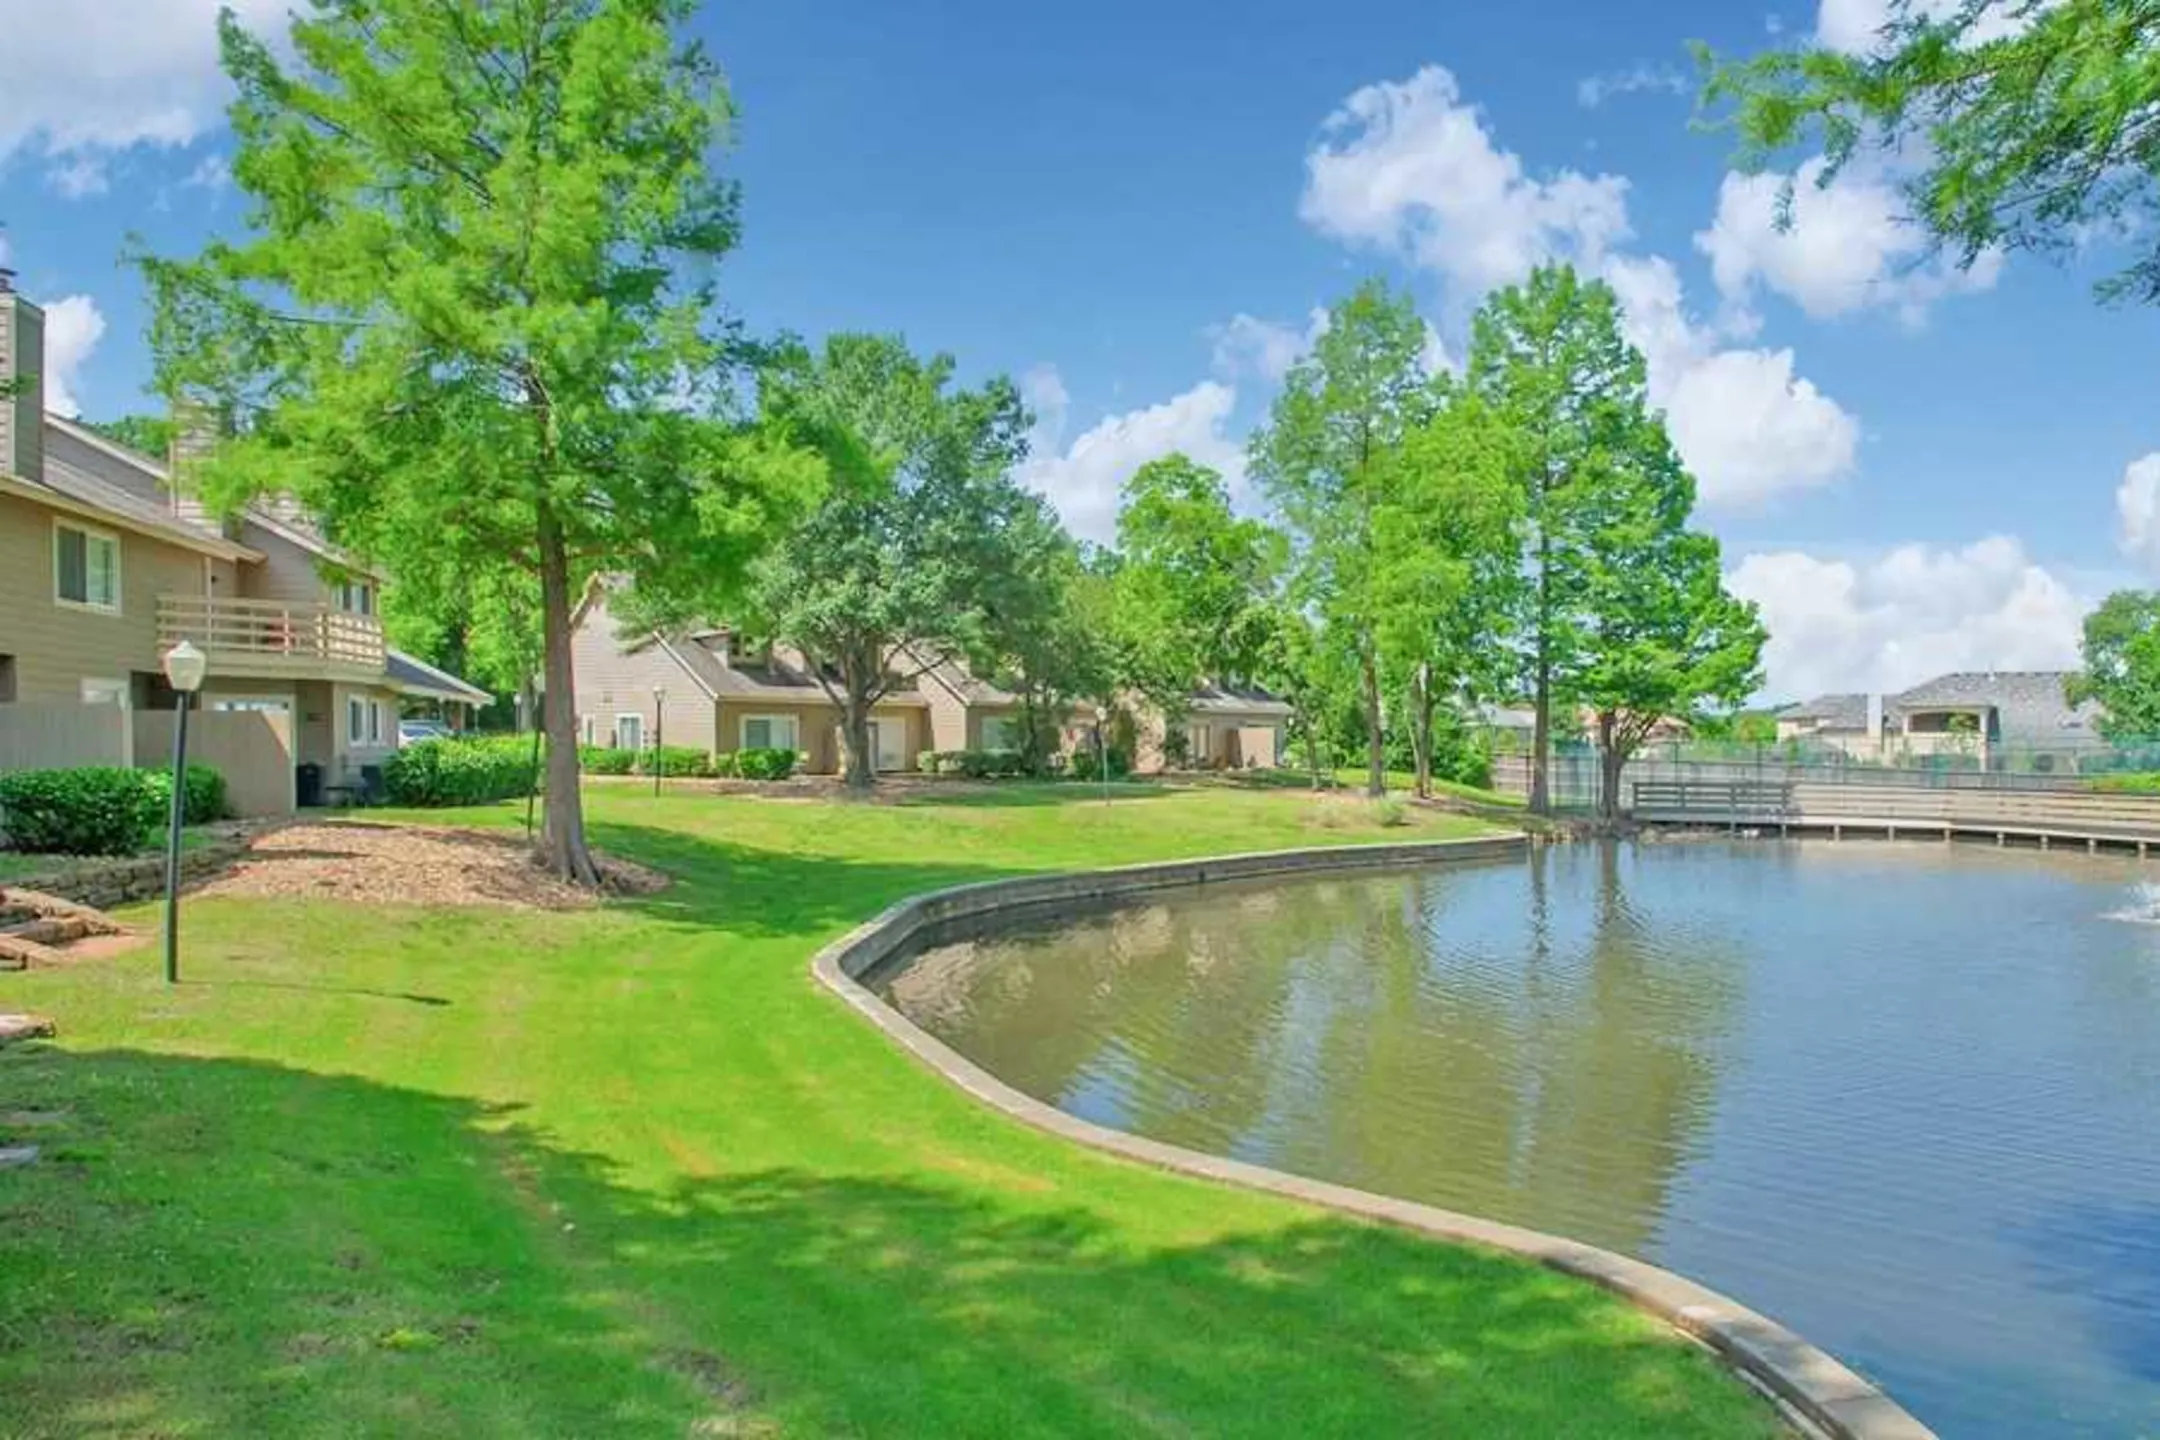 Lake - Sheridan Pond Apartments And Guest Suites - Tulsa, OK